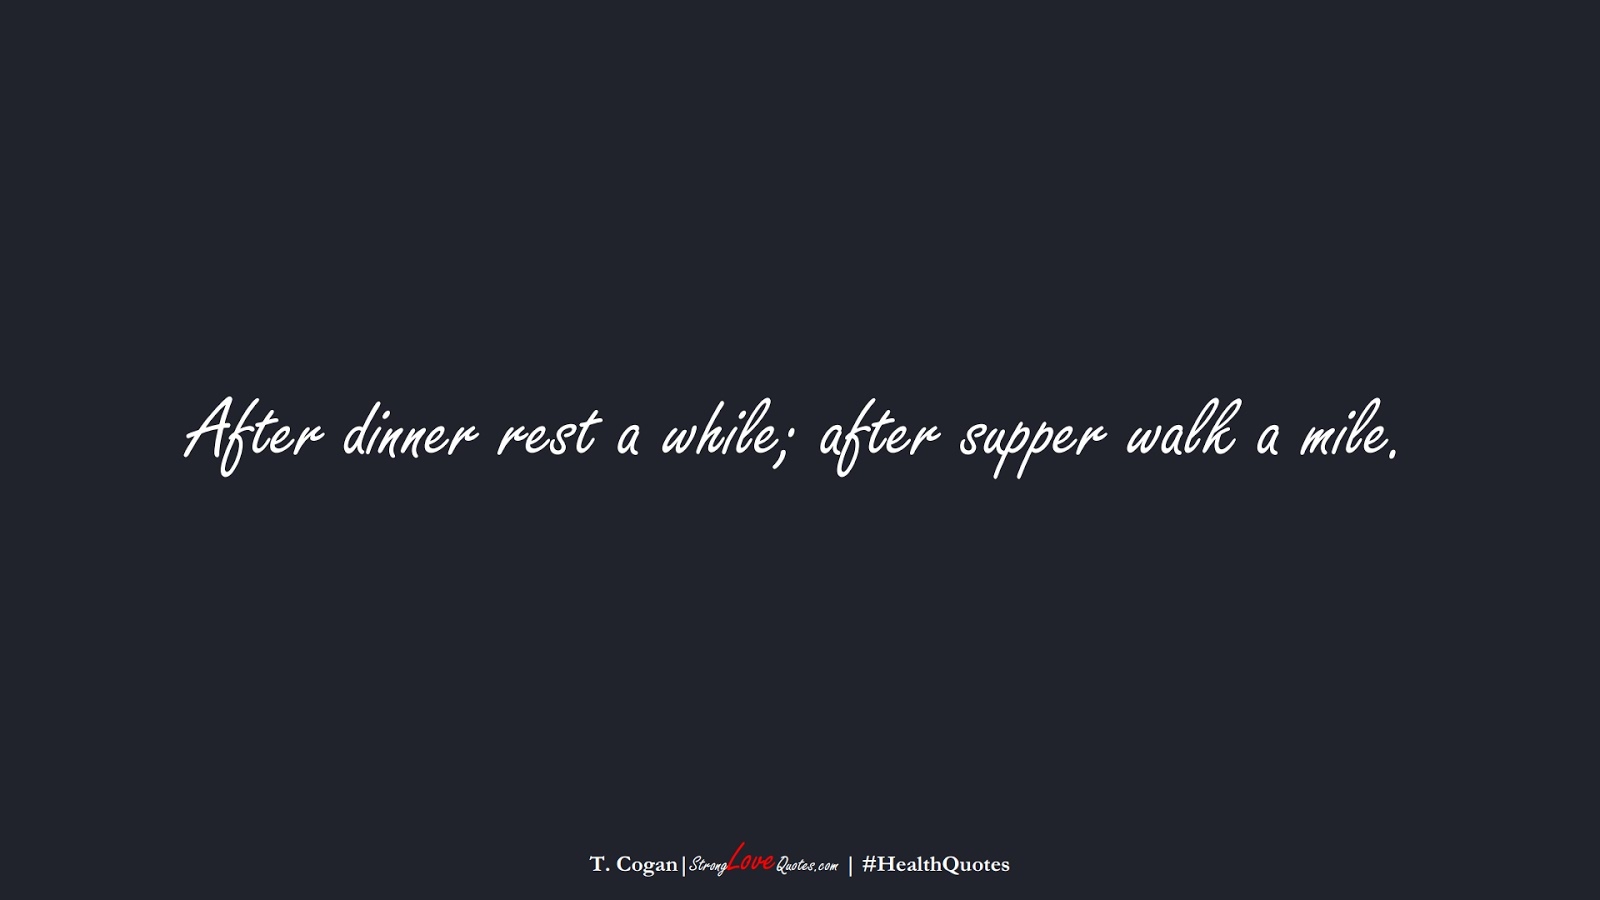 After dinner rest a while; after supper walk a mile. (T. Cogan);  #HealthQuotes